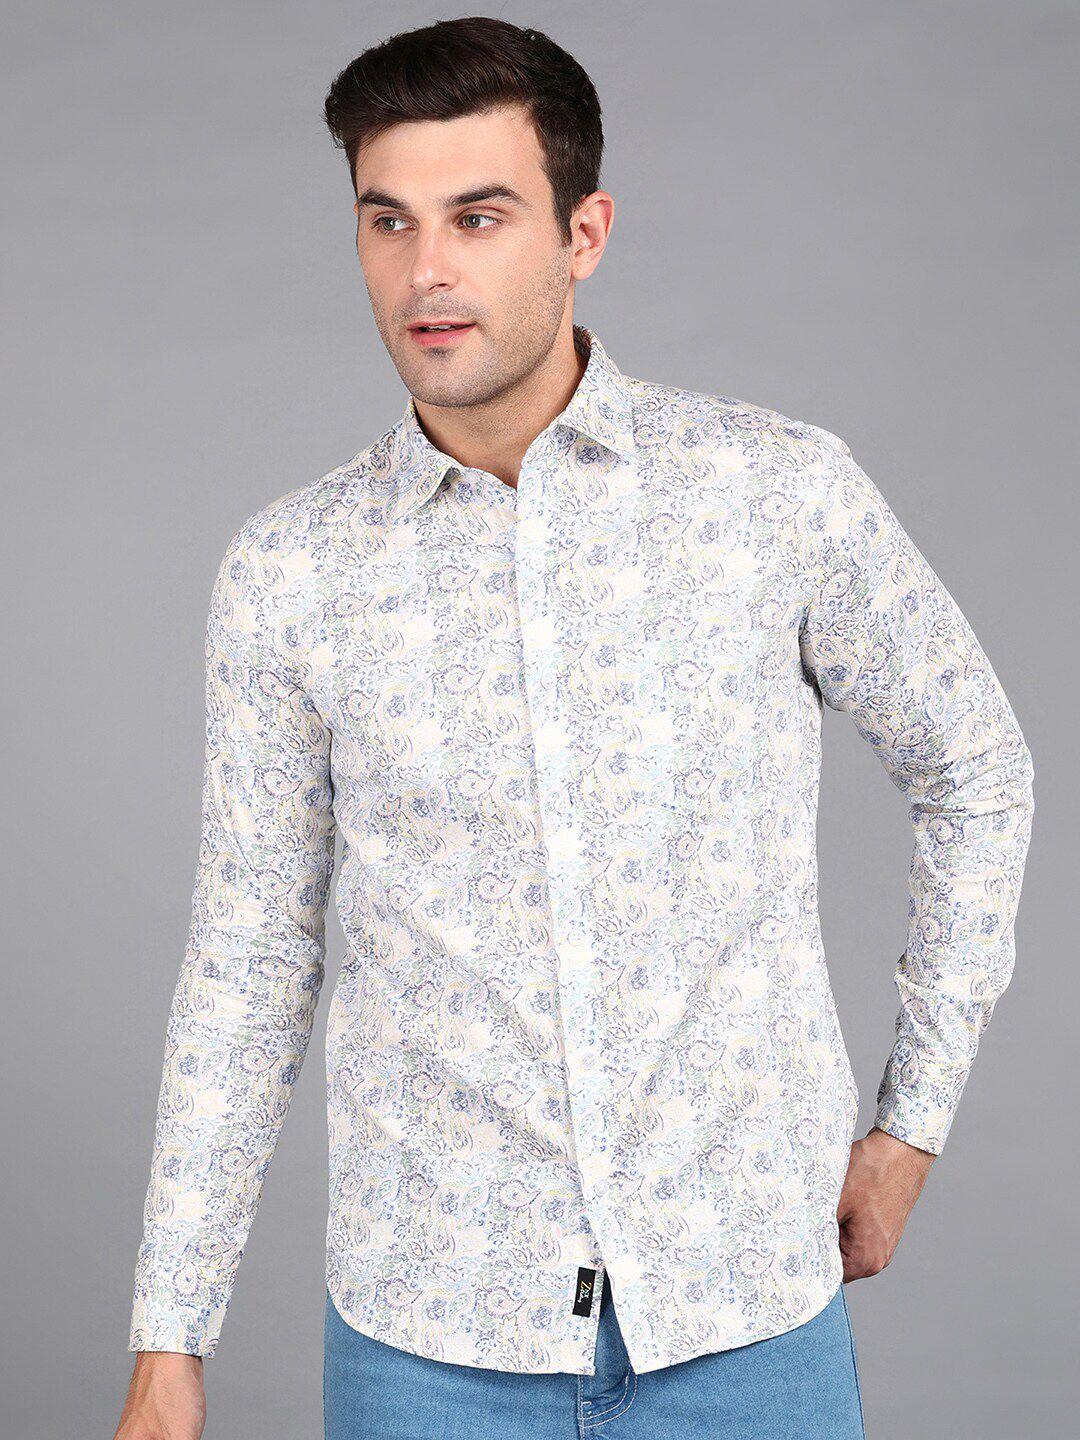 znx clothing men off white premium floral opaque printed formal shirt